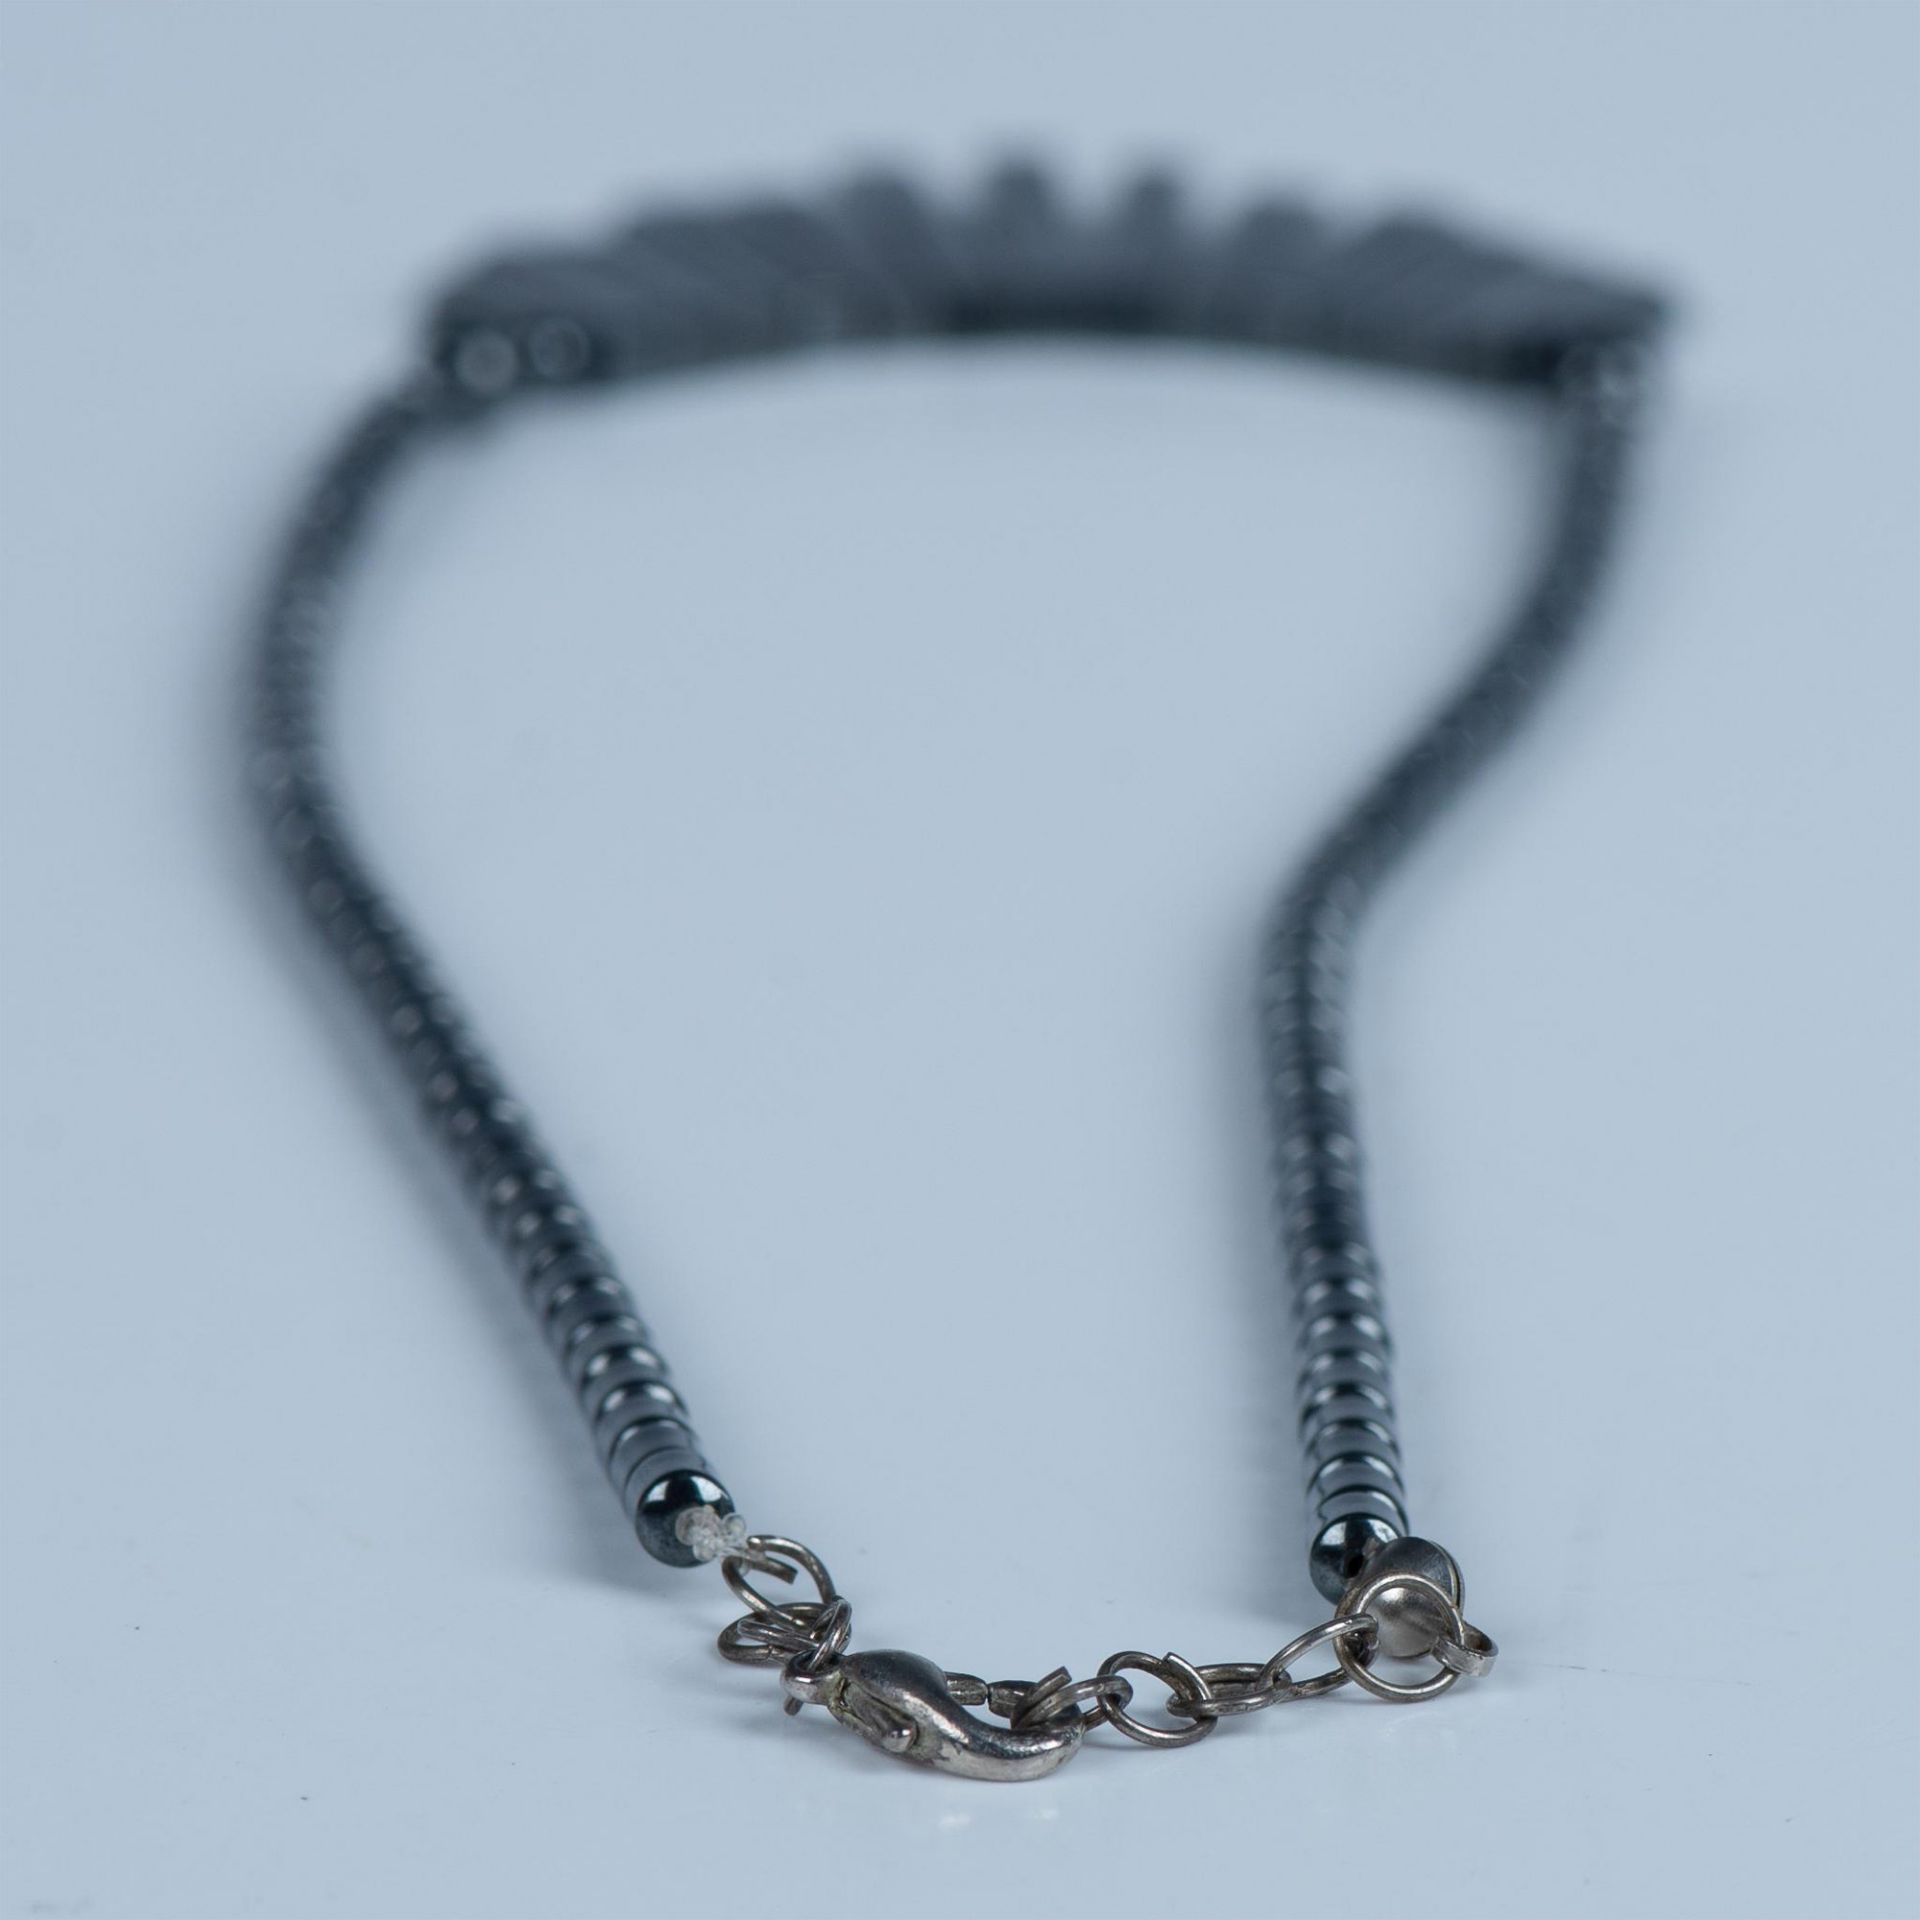 Hand Crafted Hematite Bead Necklace - Image 4 of 5